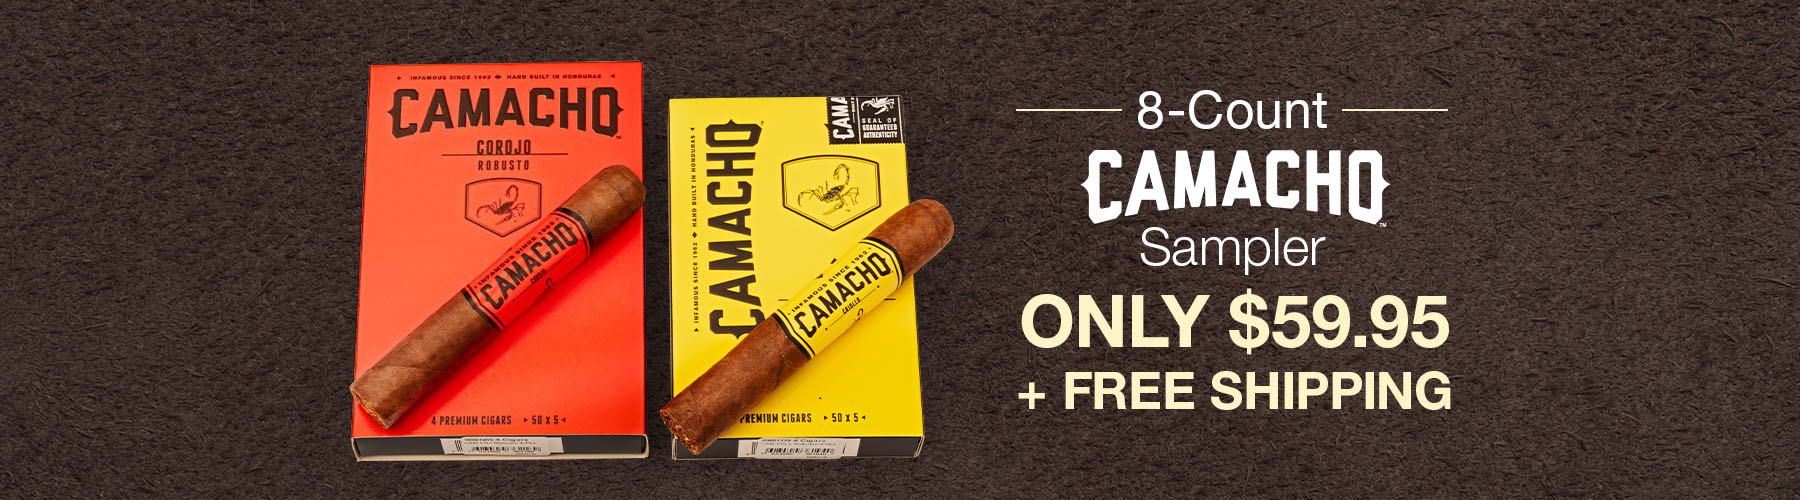 8-Count Camacho Sampler $59.95 + free shipping!